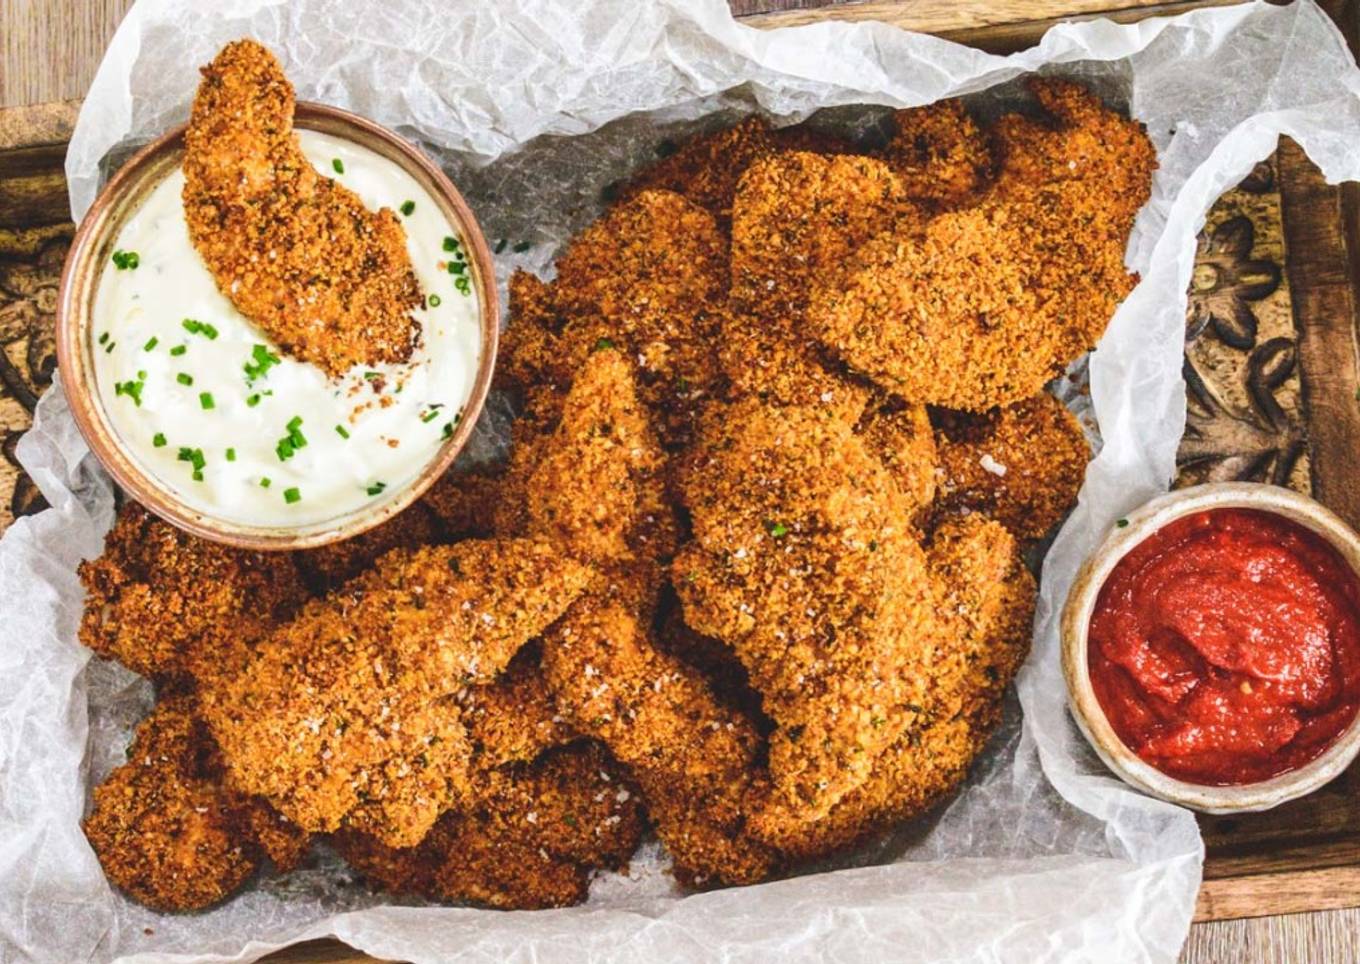 Oven-Baked Chicken Dippers with a Creamy Chive Dip